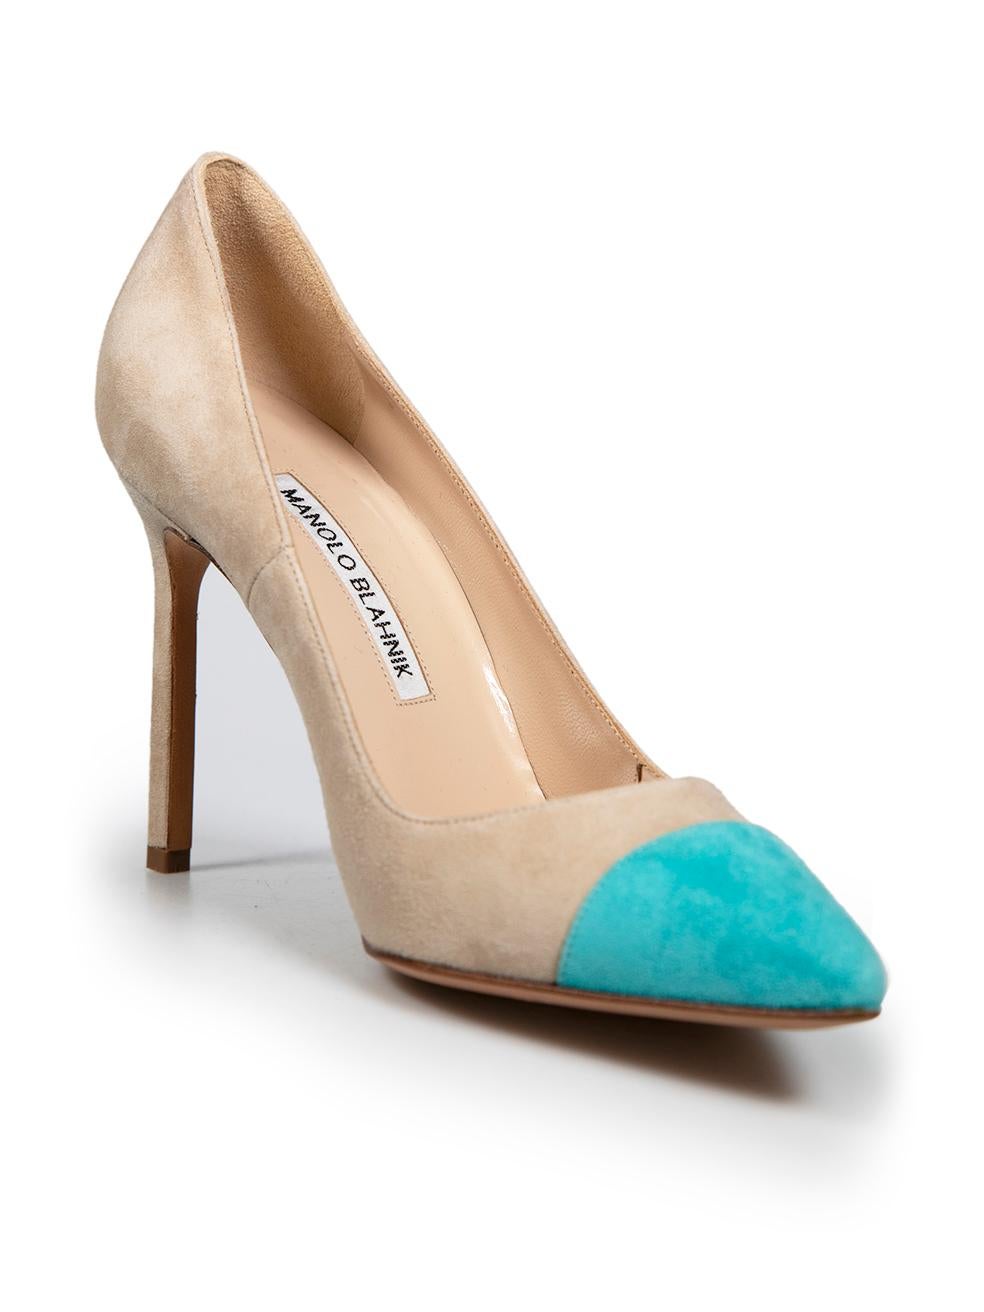 CONDITION is Never worn. No visible wear to pumps is evident on this new Manolo Blahnik designer resale item.
 
 
 
 Details
 
 
 Beige
 
 Suede
 
 Slip on pumps
 
 Contrast turquoise cap toe
 
 Pointed toe
 
 High heel
 
 
 
 
 
 Made in Italy
 
 
